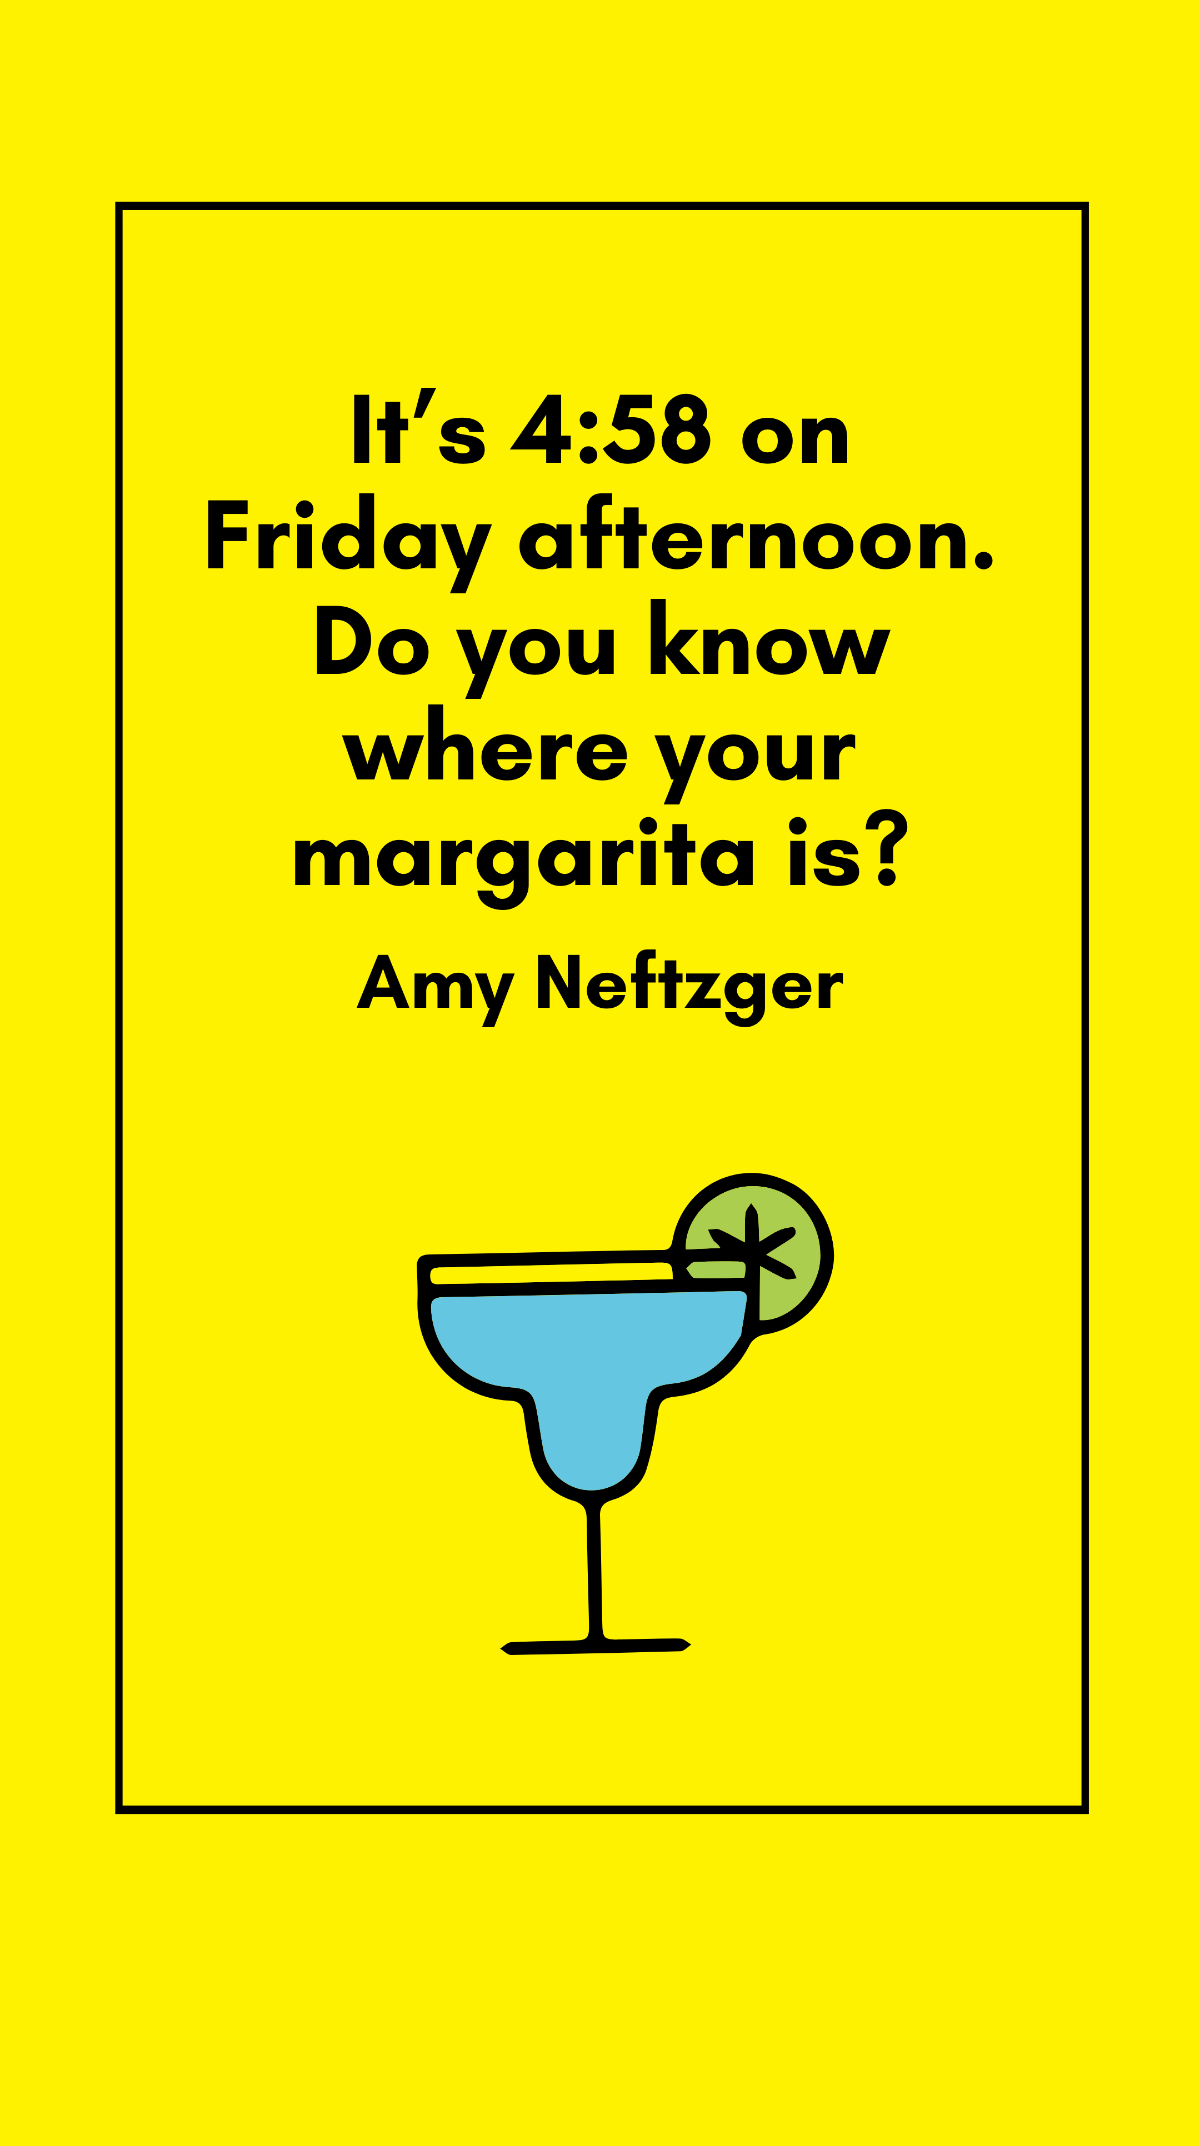 Amy Neftzger - It’s 4:58 on Friday afternoon. Do you know where your margarita is?  Template